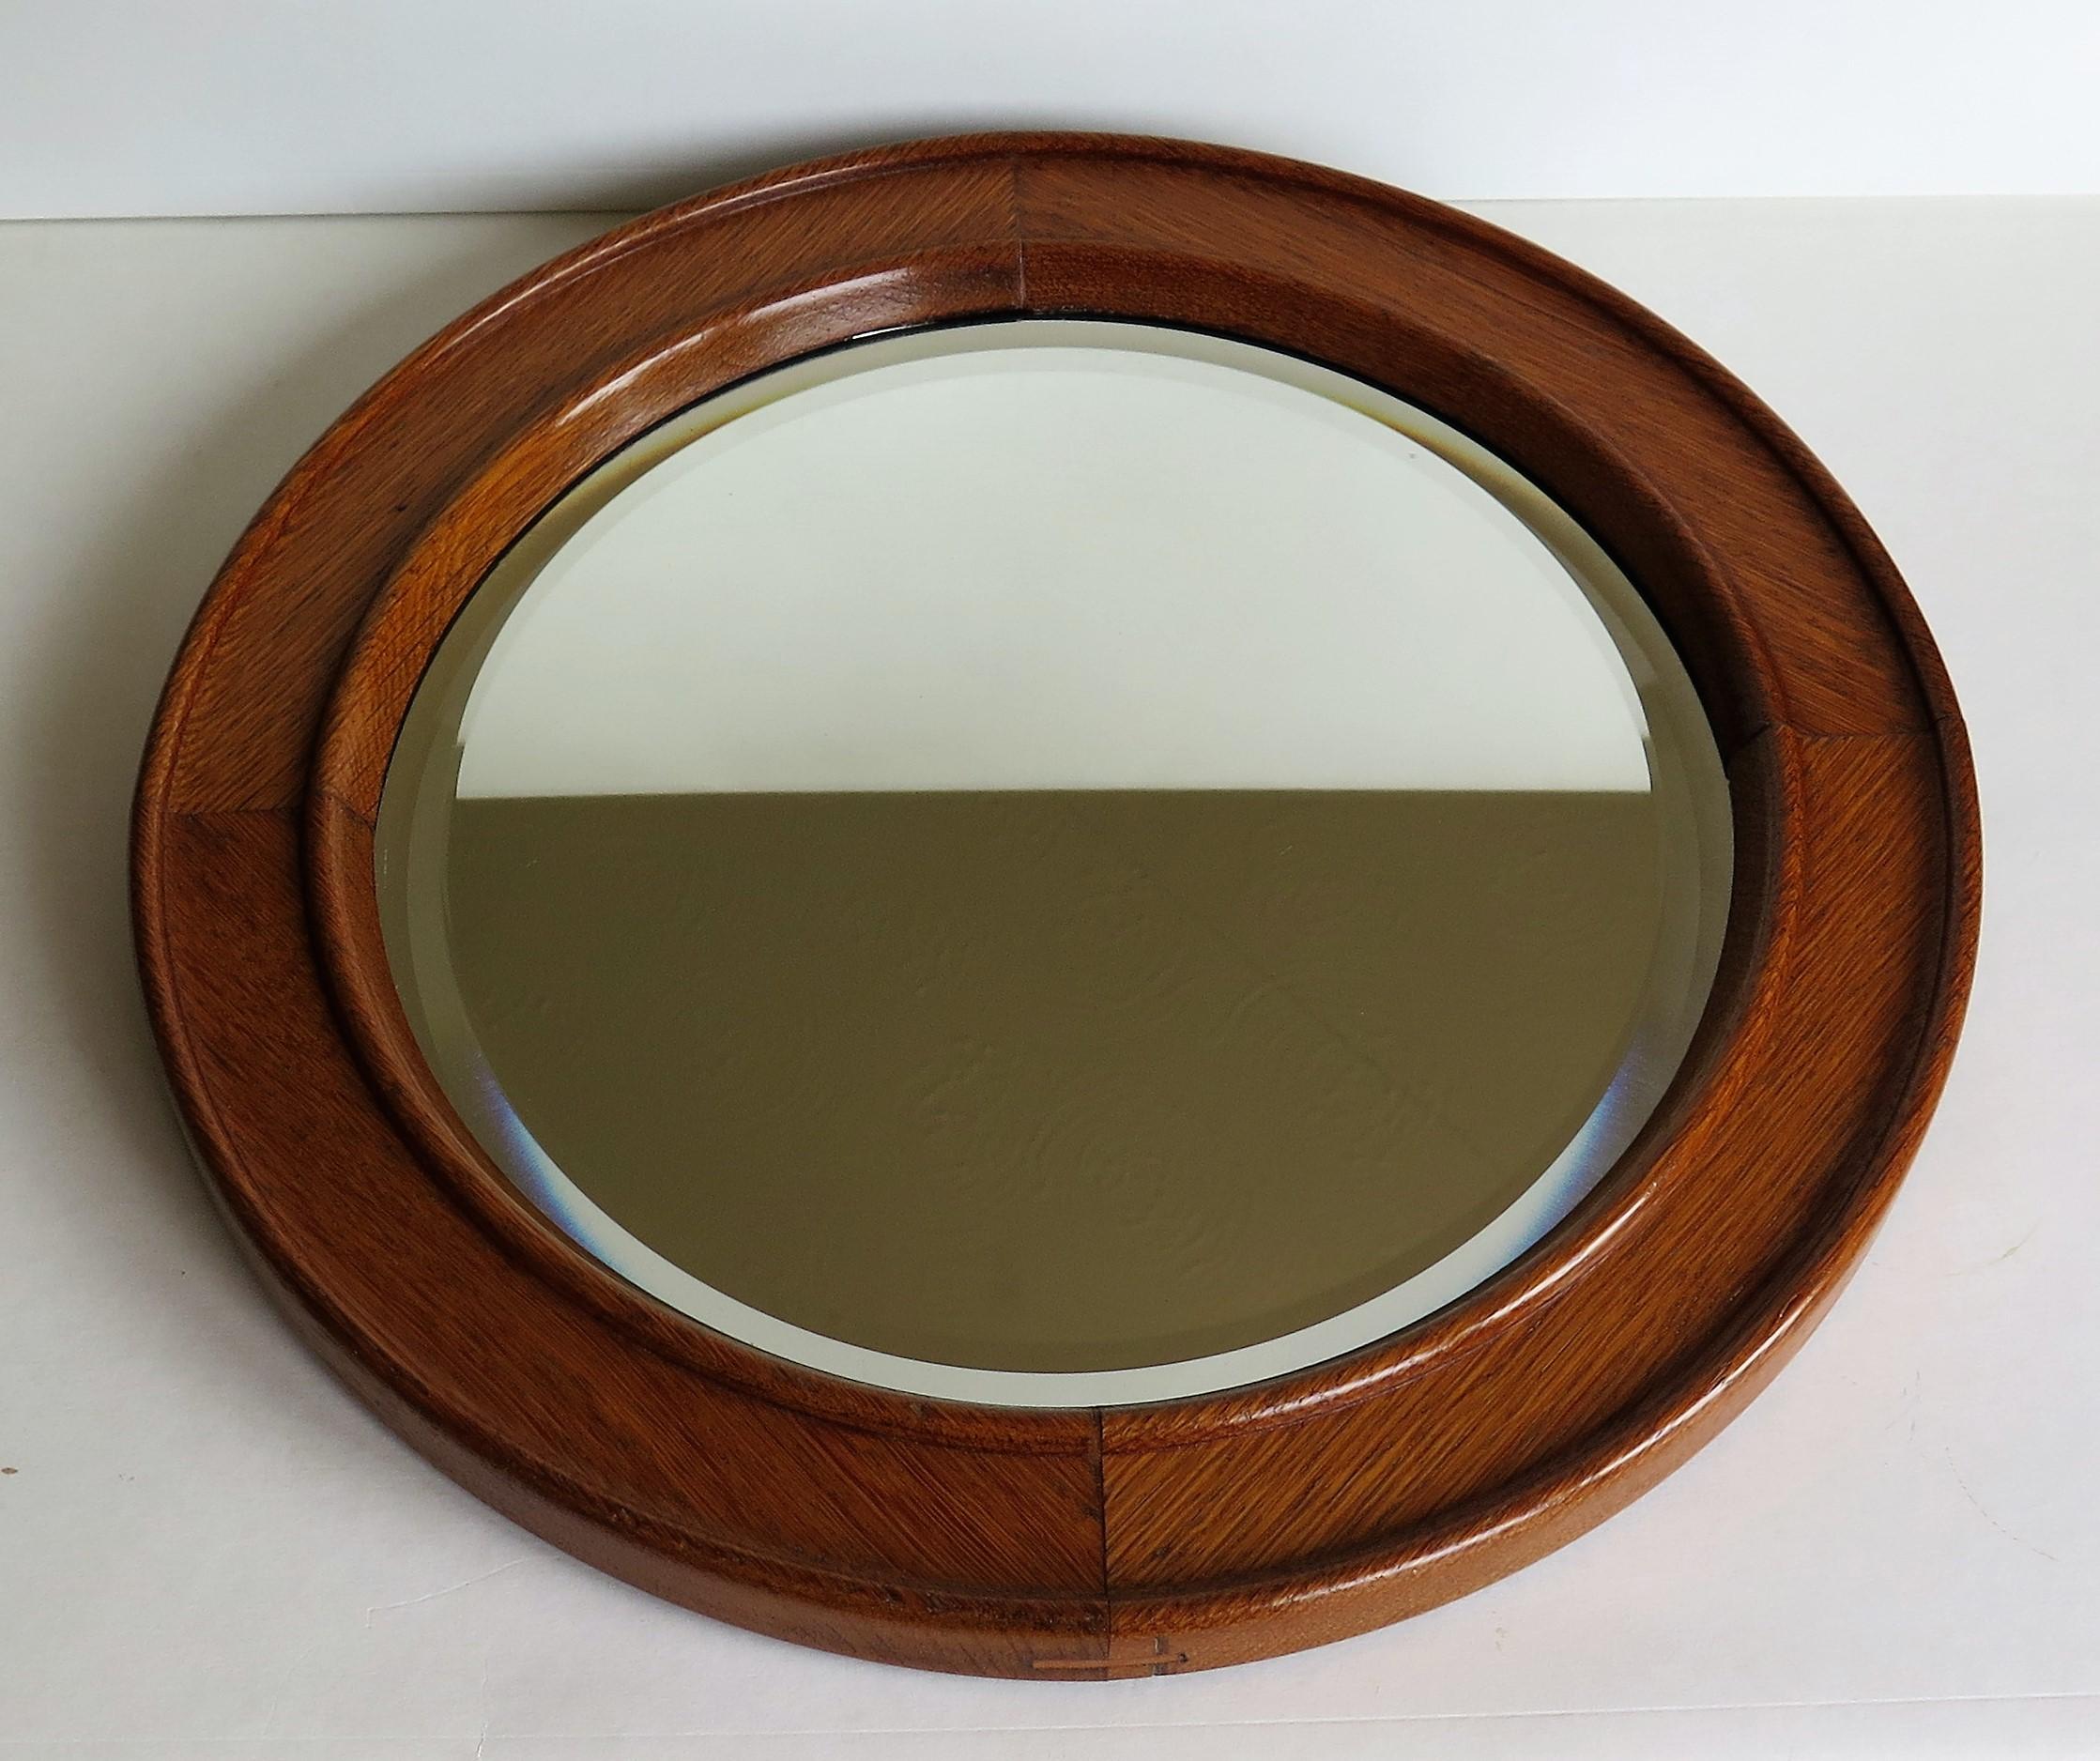 19th C. Arts & Crafts Circular Wall Mirror Golden Oak Jointed Frame Bevel Glass 3